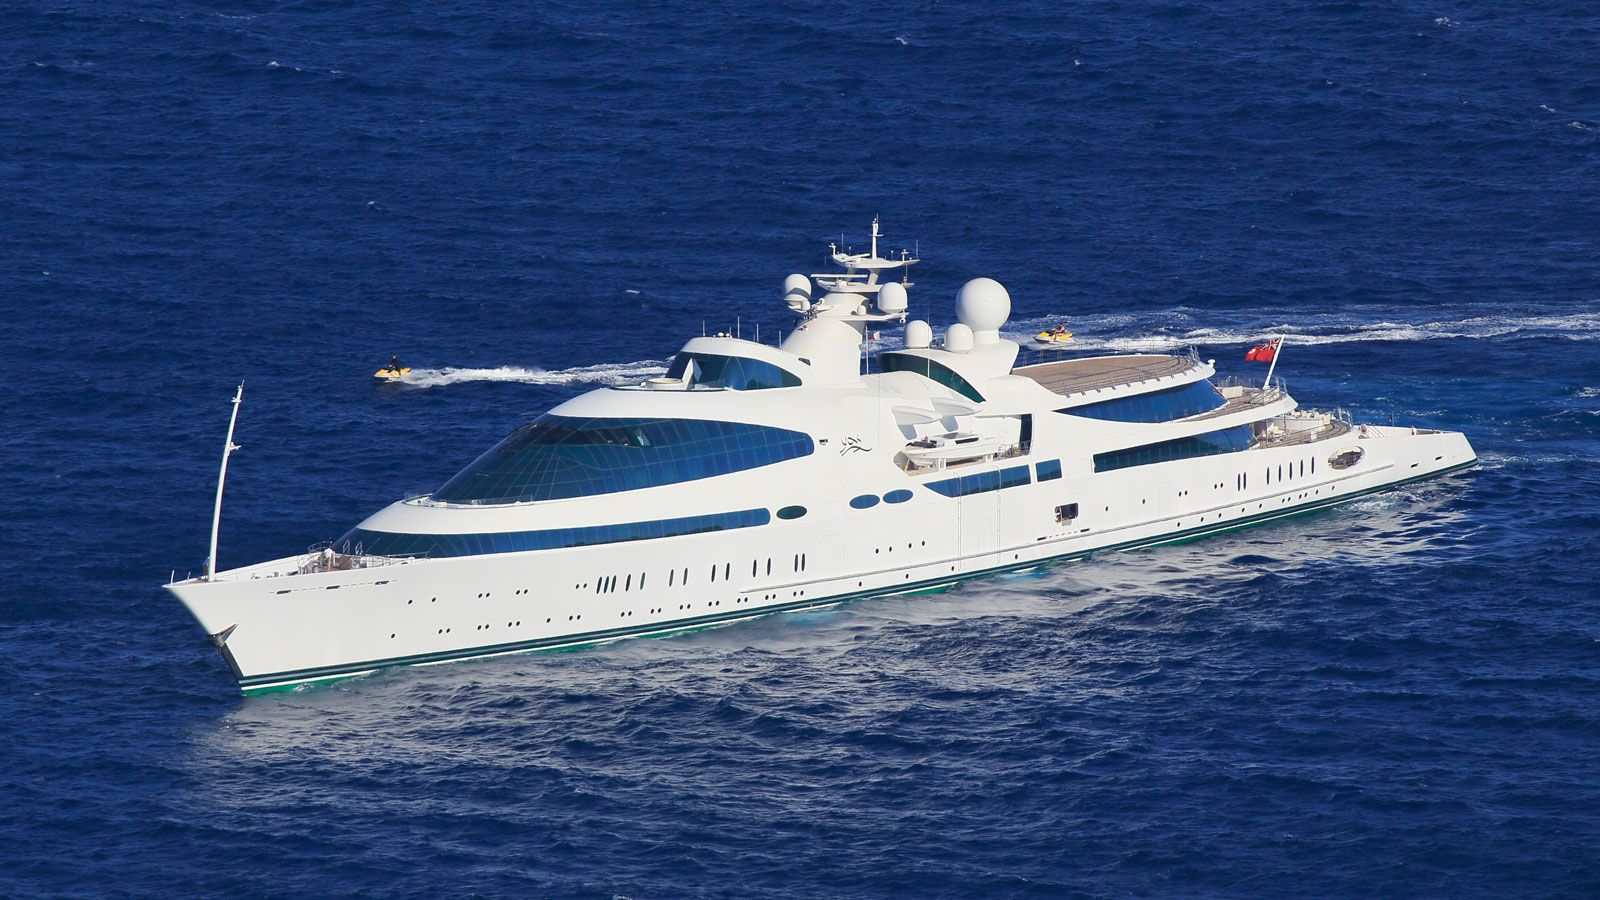 Yacht watchers excited at unscheduled stop of 141-metre megayacht owned by the Crown Prince of Dubai in Malaga – its second in a year [Video]